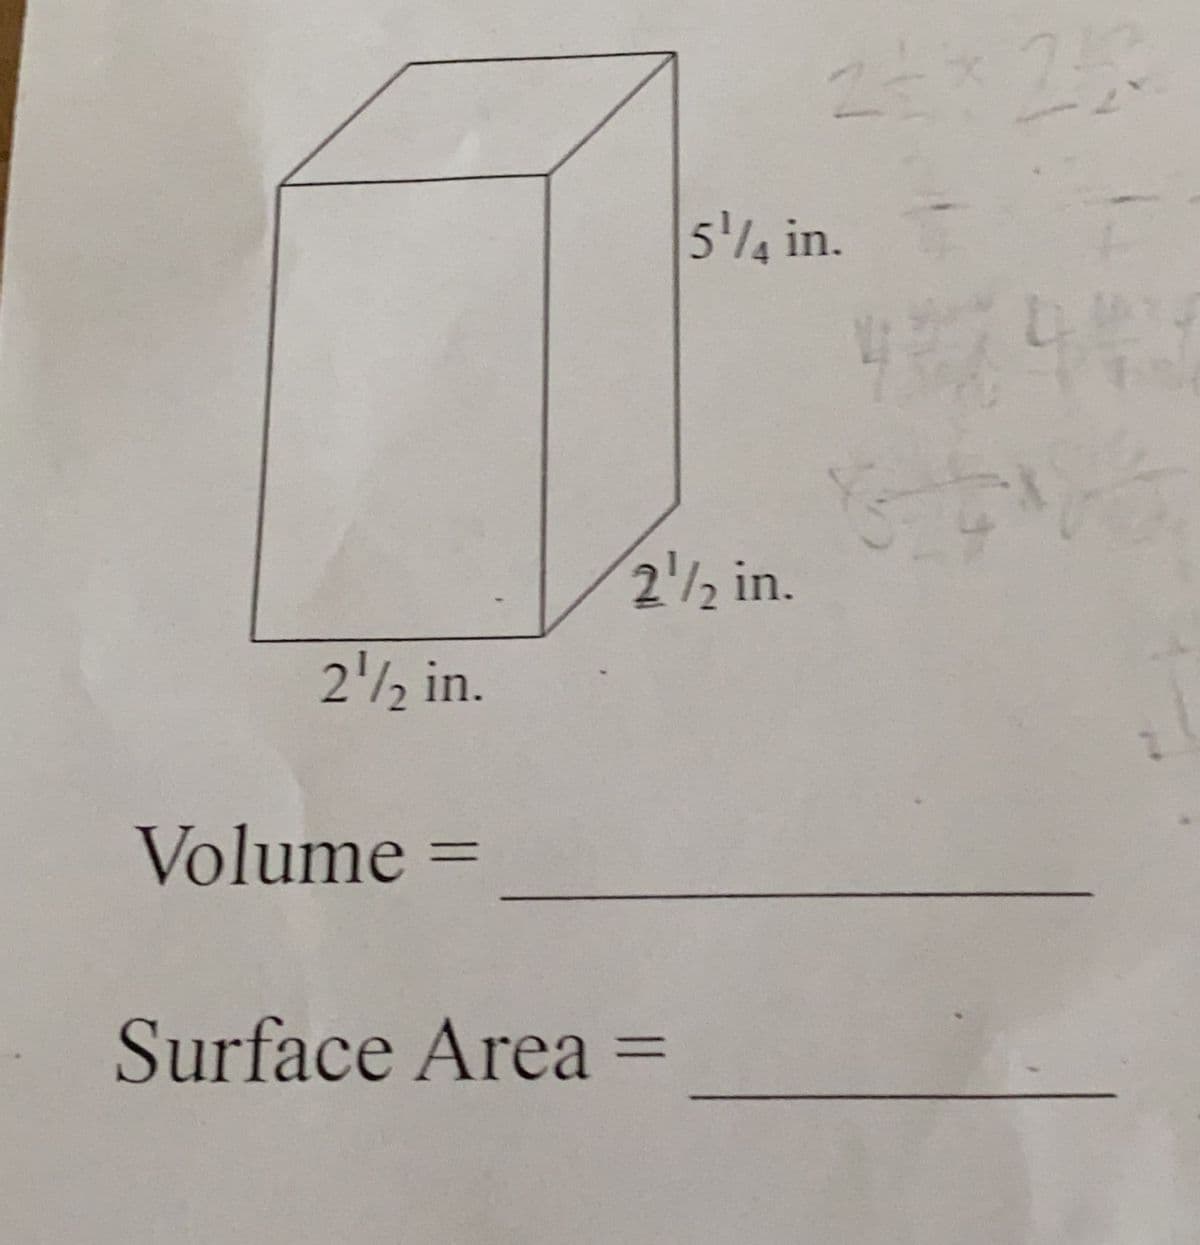 54 in.
22 in.
22 in.
Volume =
Surface Area =
%3D
